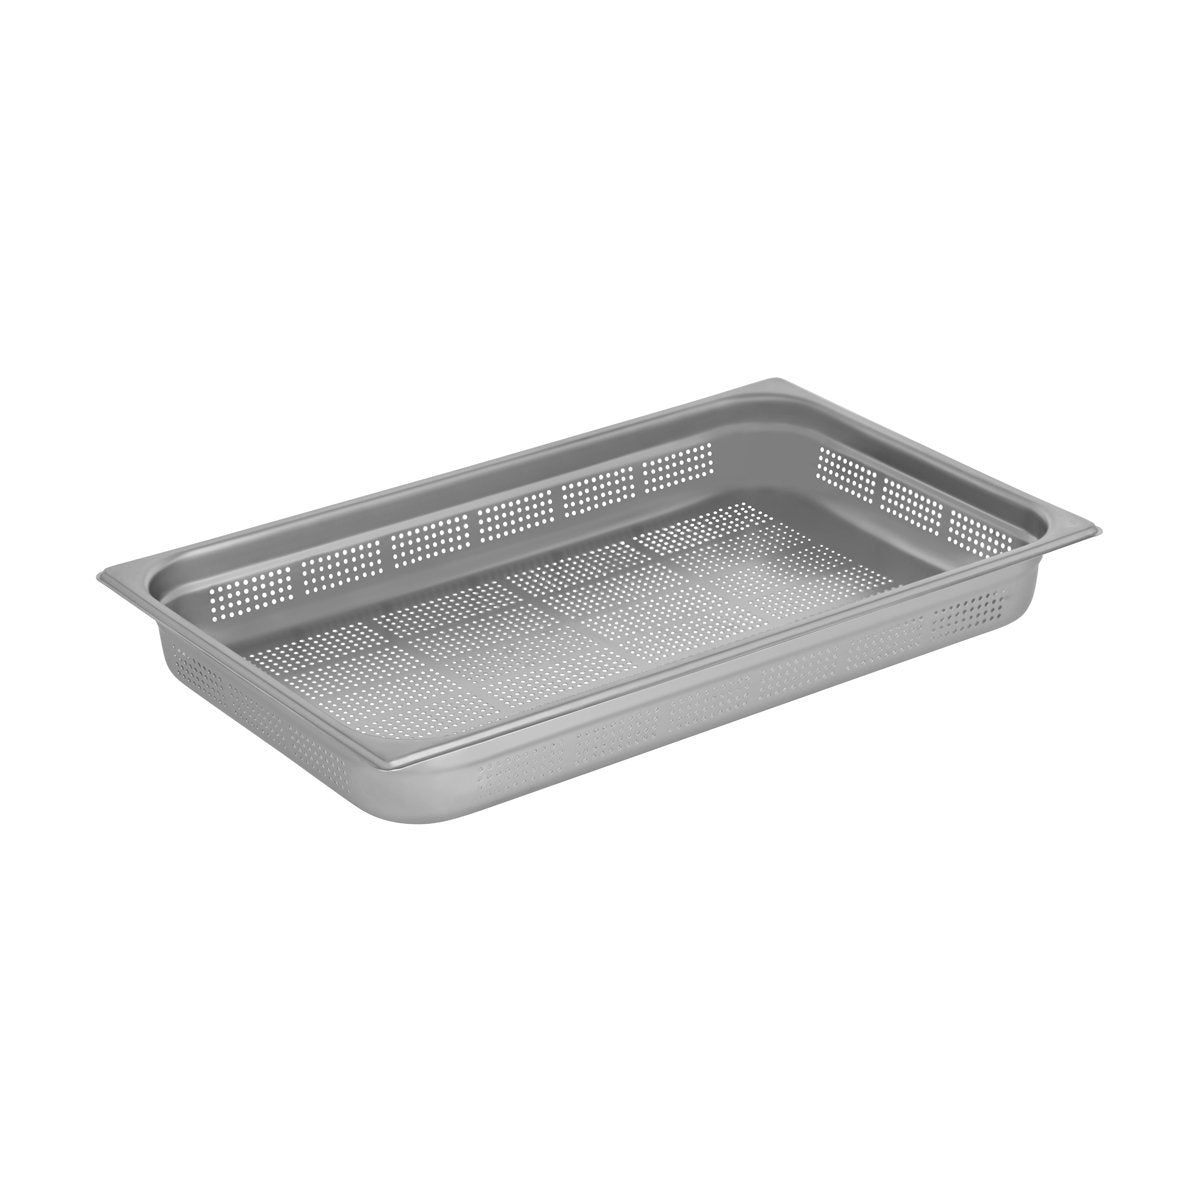 GNP-11065 Chef Inox Gastronorm Pan Perforated 1/1 Size 65mm Tomkin Australia Hospitality Supplies